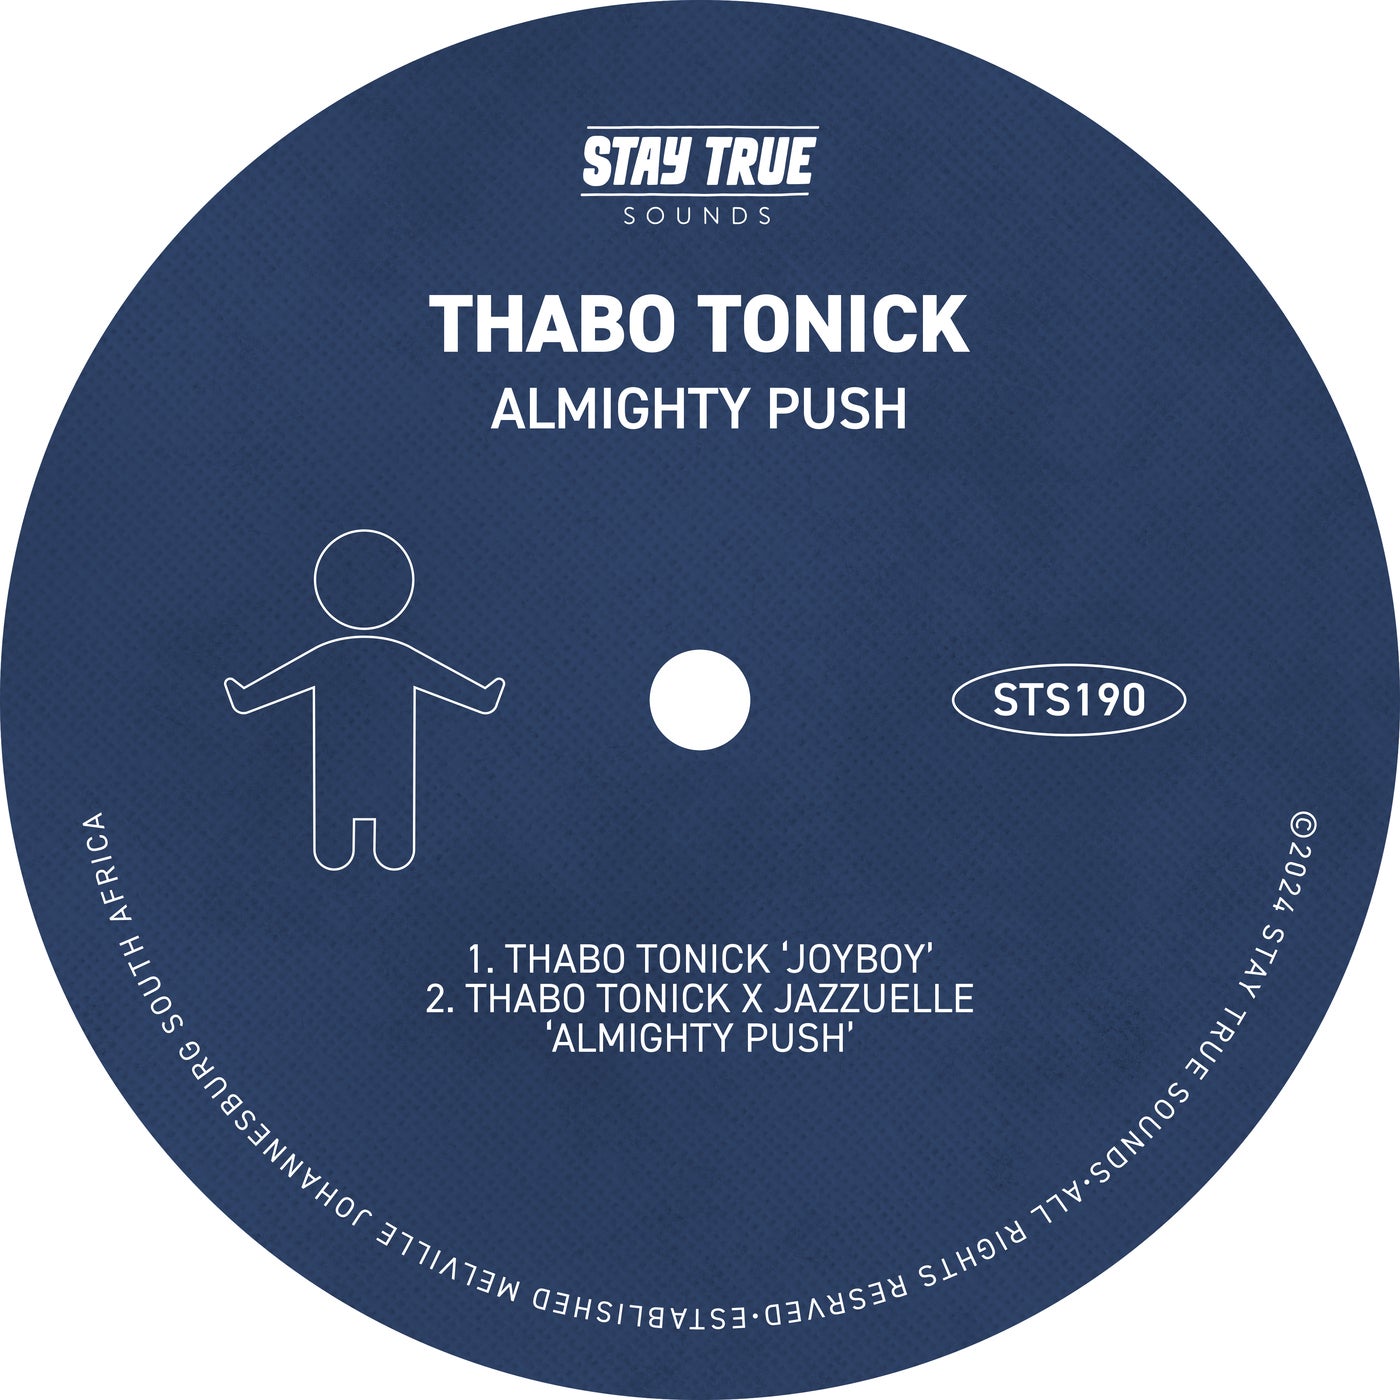 image cover: Thabo Tonick - Almighty Push on Stay True Sounds